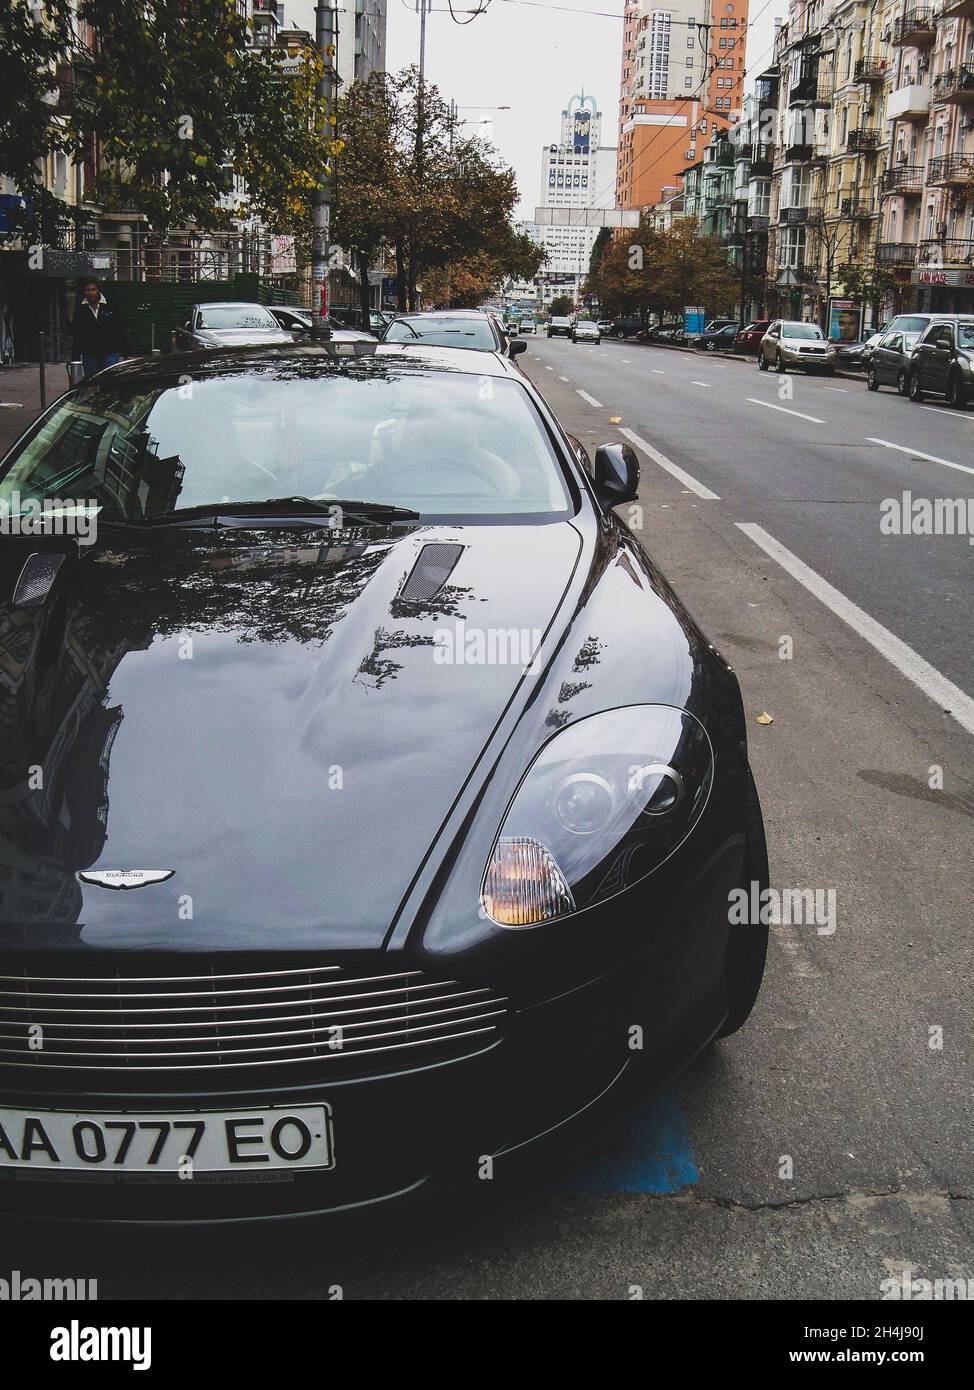 Cluj-Napoca,Cluj/Romania-01.31.2020-Ford Mondeo MK5 Sport edition with  dynamic led headlights, sport front bumper, 18 inch alloy wheels, Aston  Martin look a like, png Stock Photo